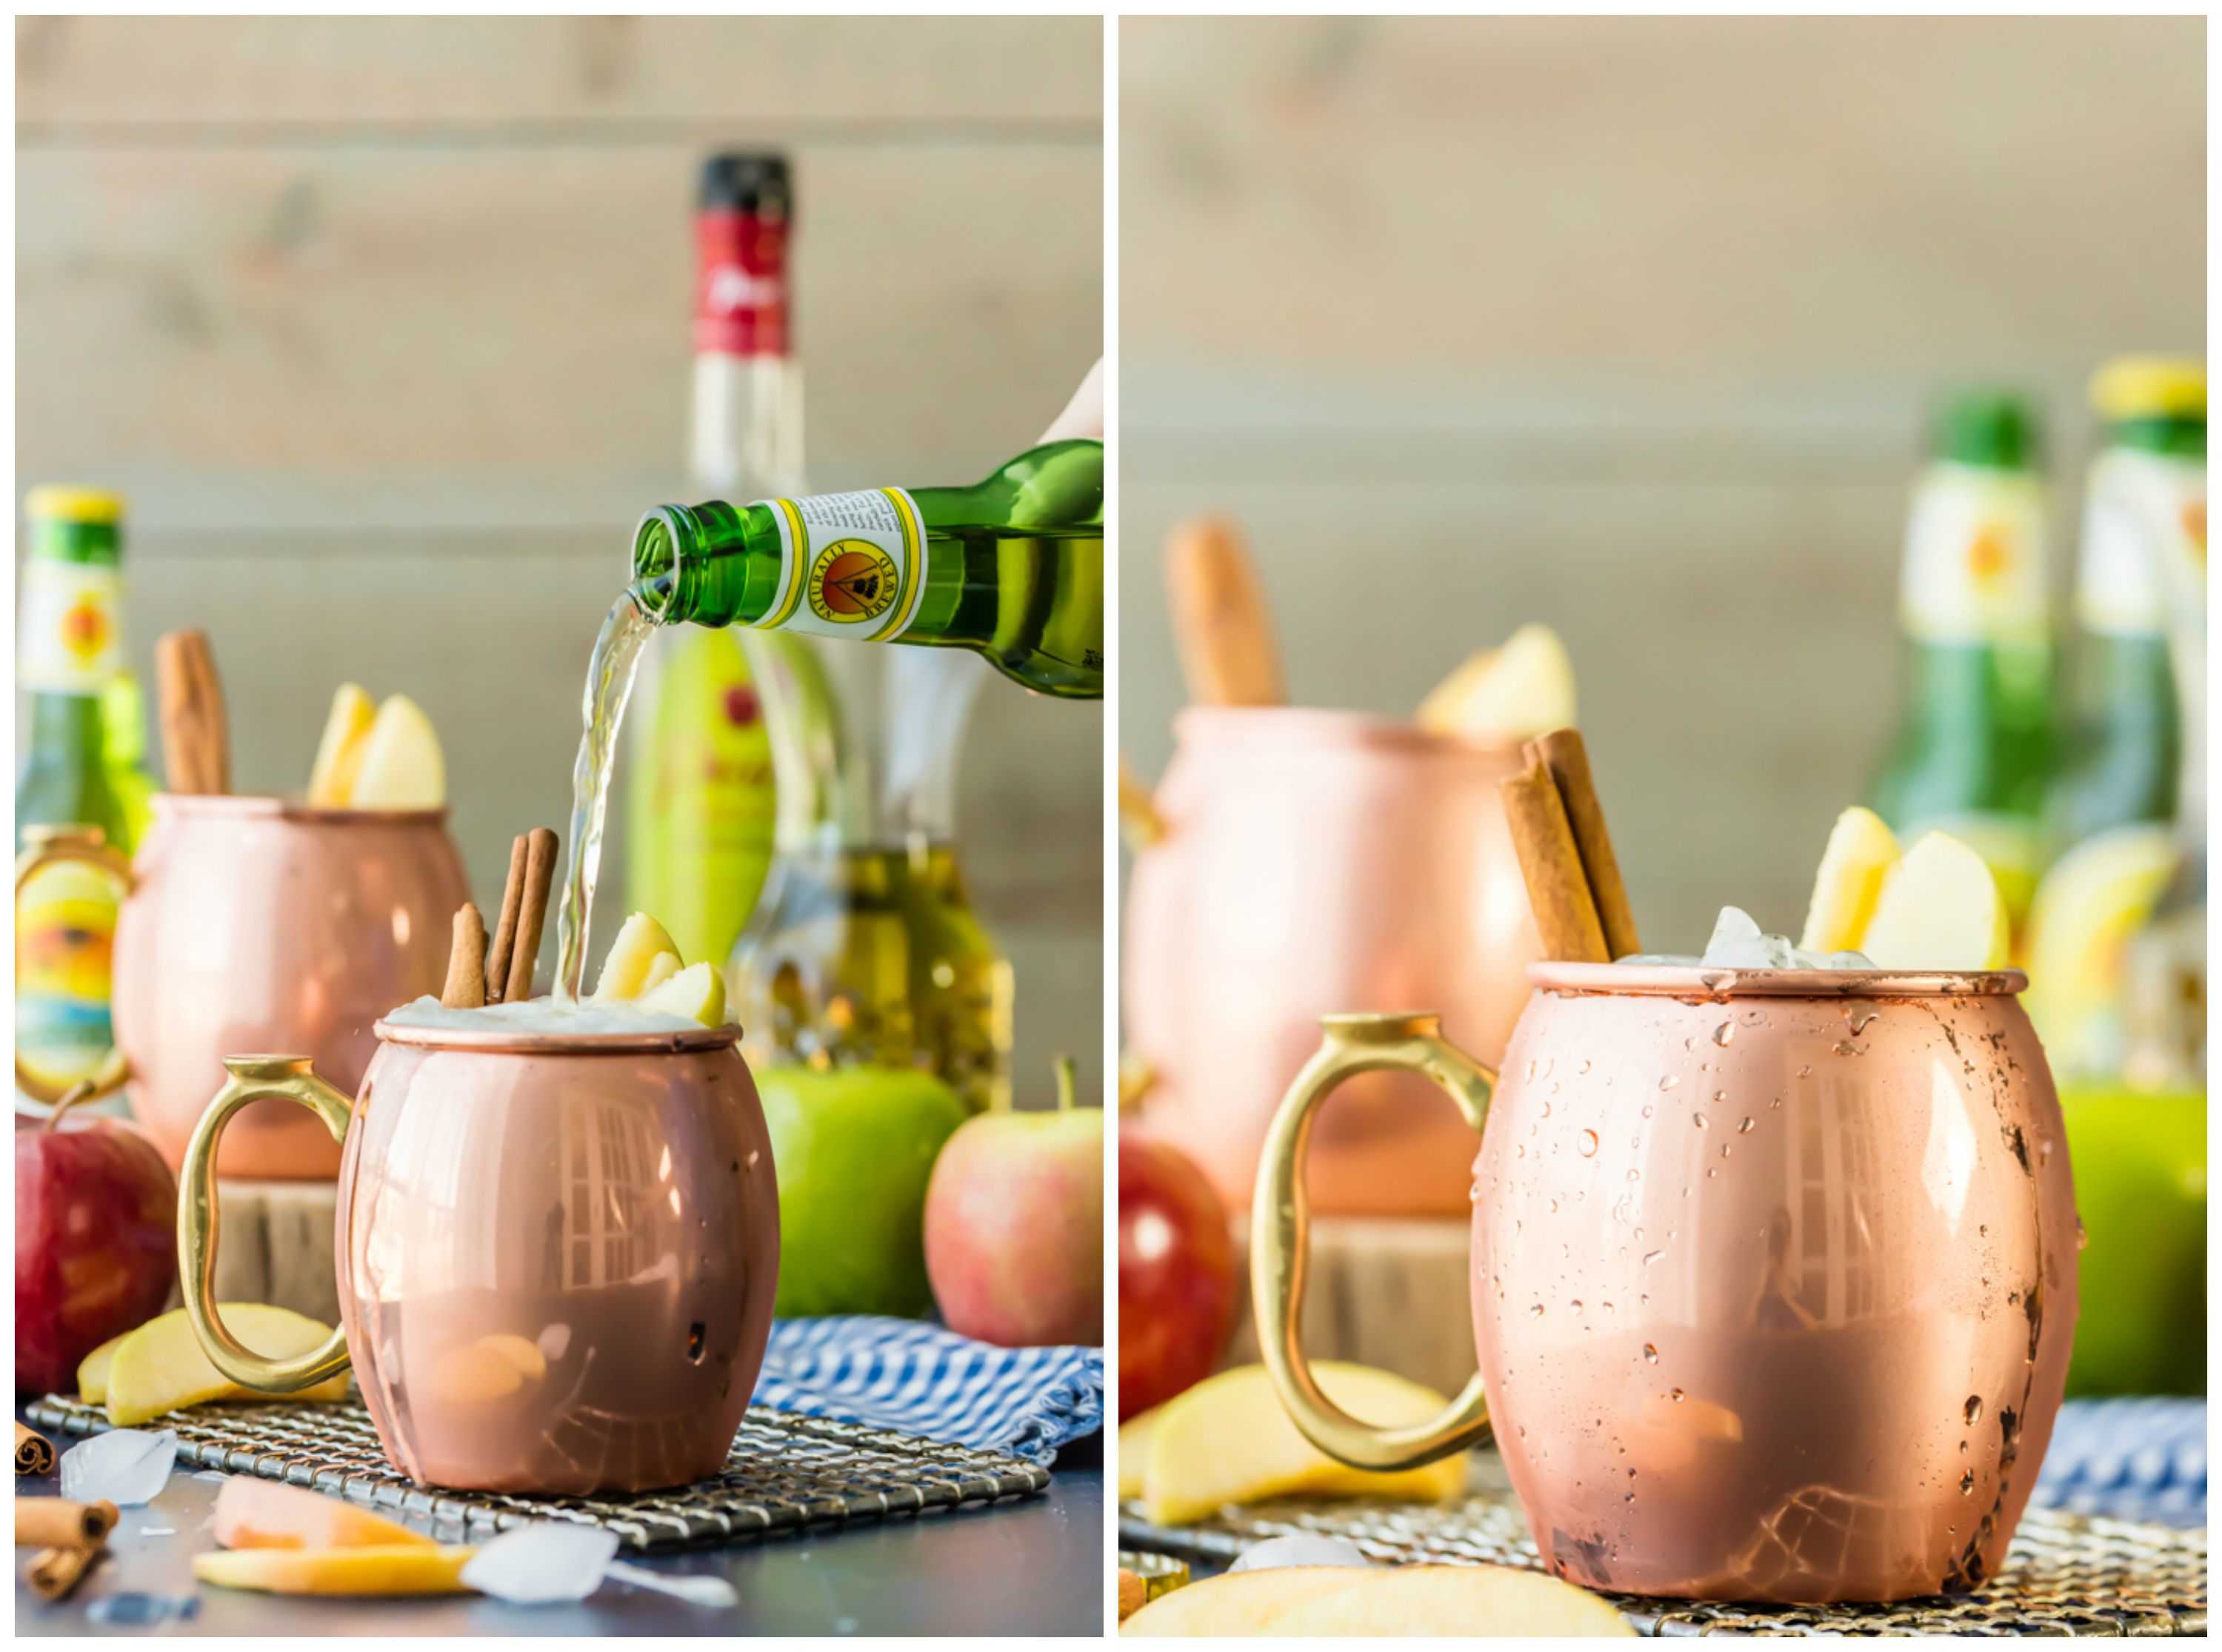 https://www.thecookierookie.com/wp-content/uploads/2015/09/apple-pie-moscow-mule-collage-1.jpg